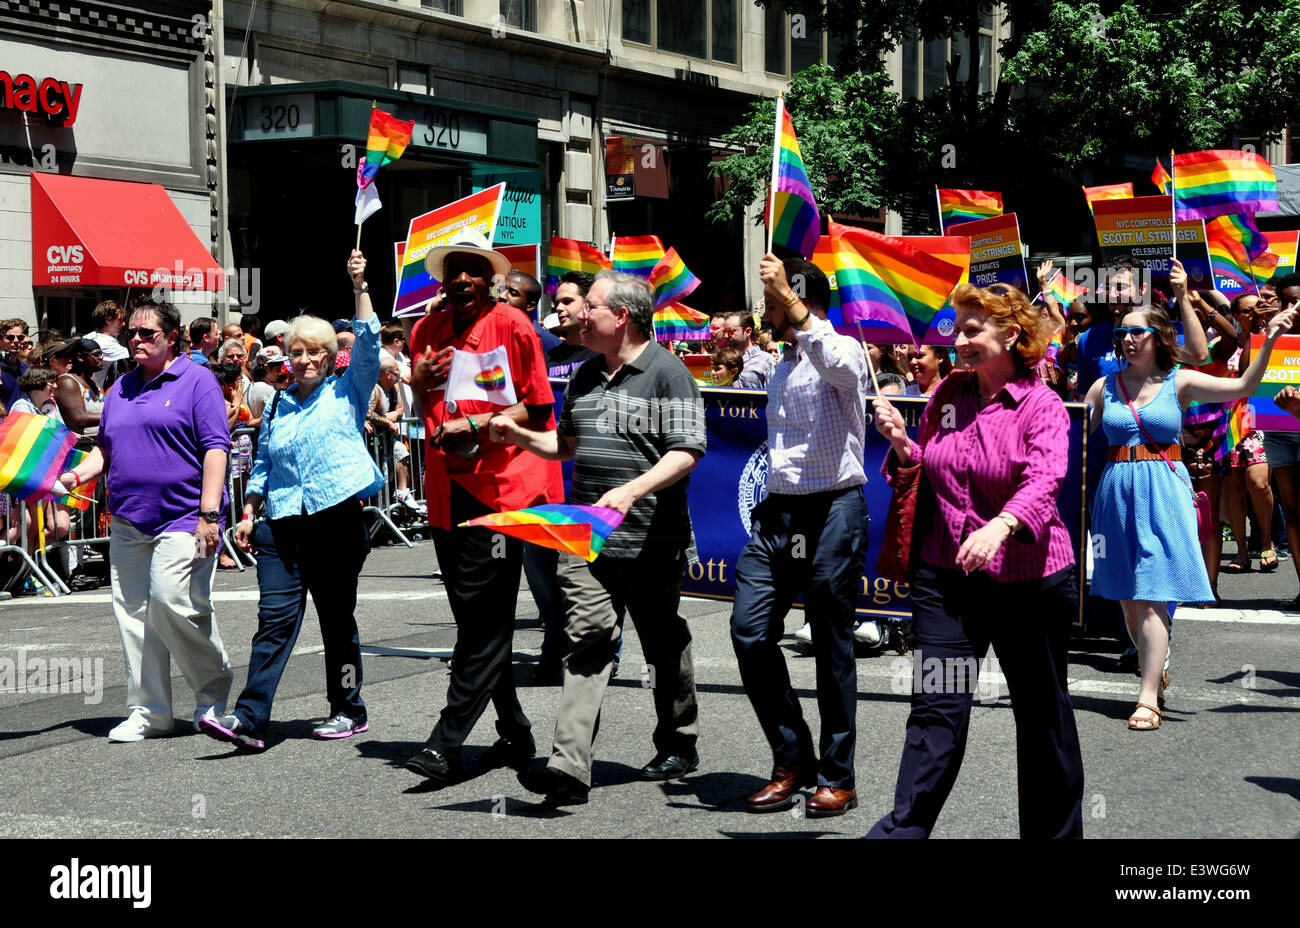 when is the gay pride parade in new york 2014